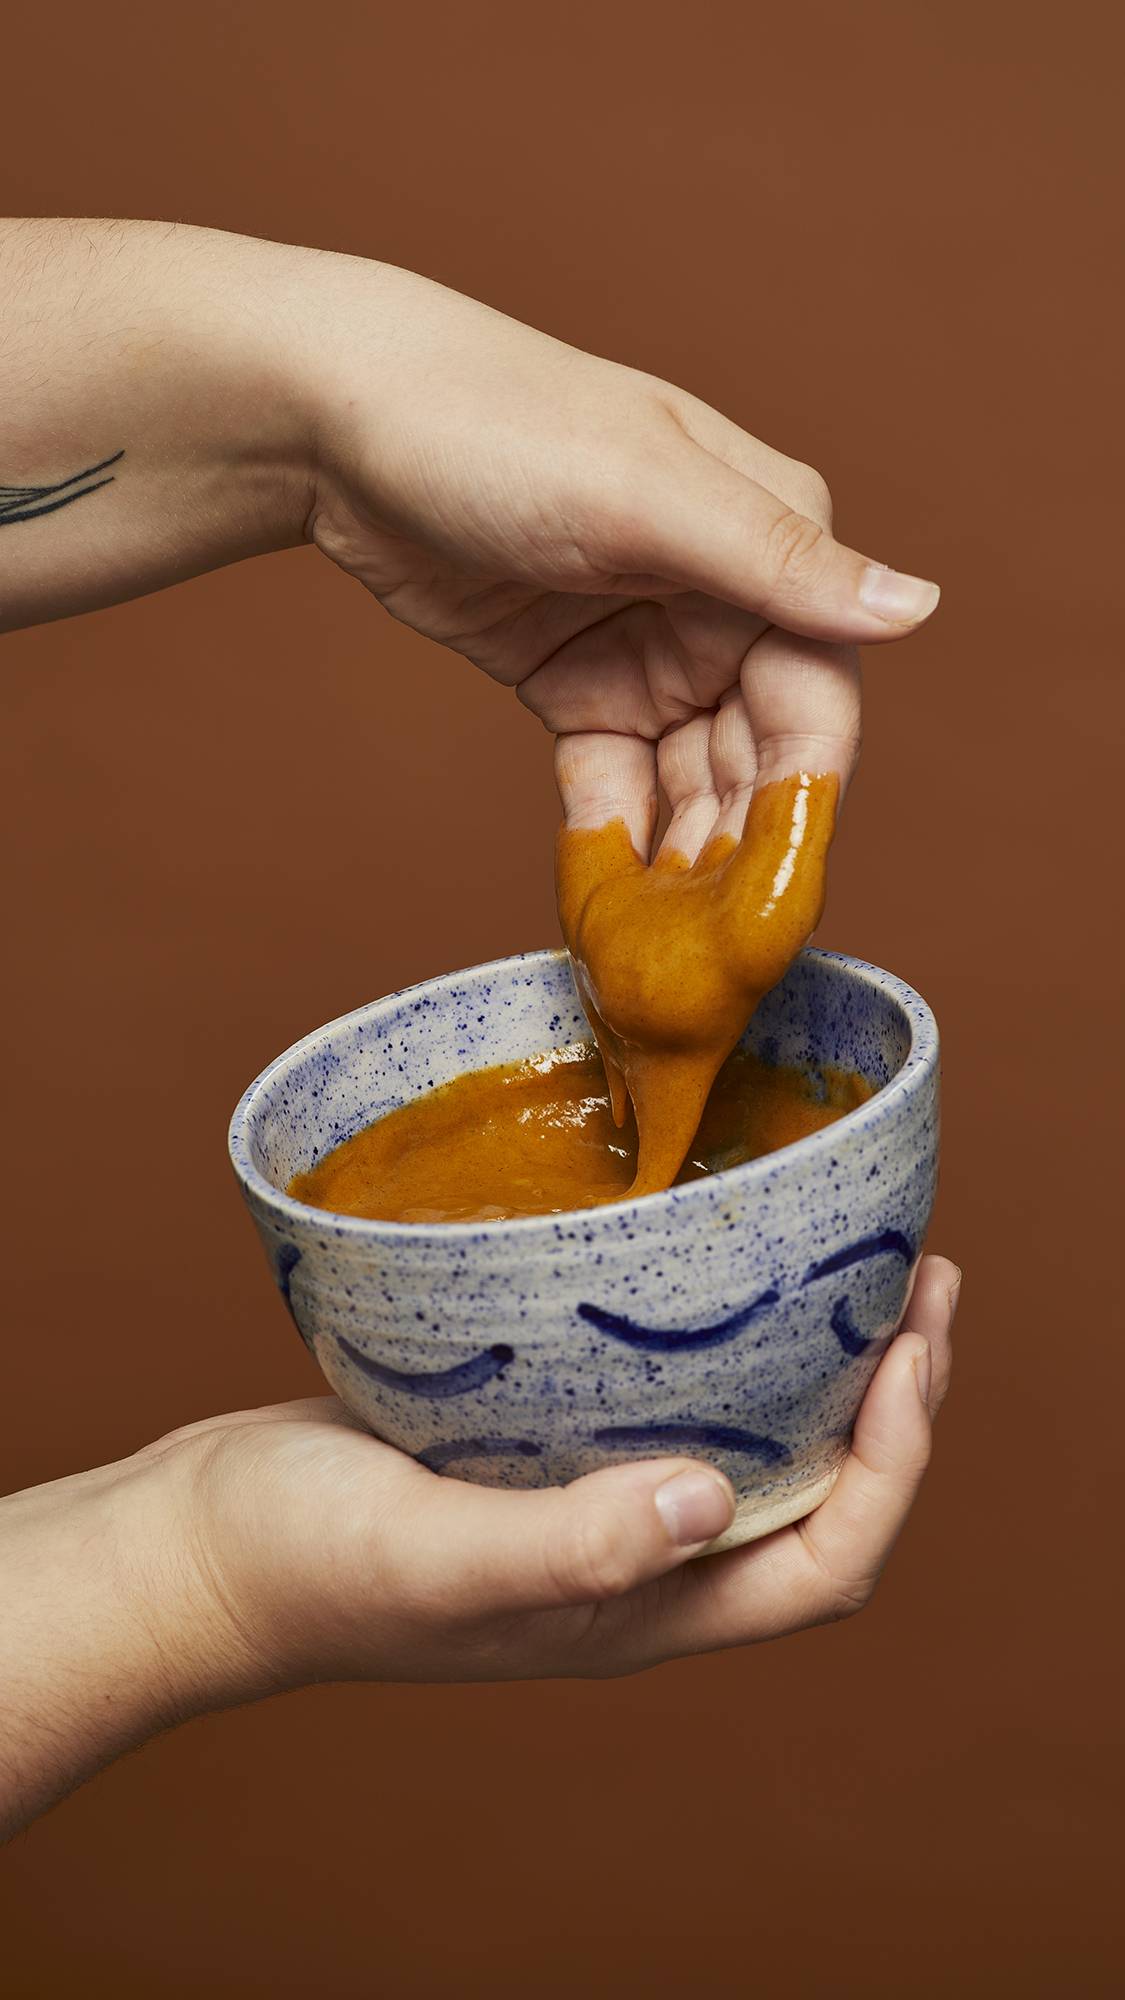 Image shows the model scooping the Hennaed hot oil treatment out of a blue ceramic bowl in front of an earthy background.